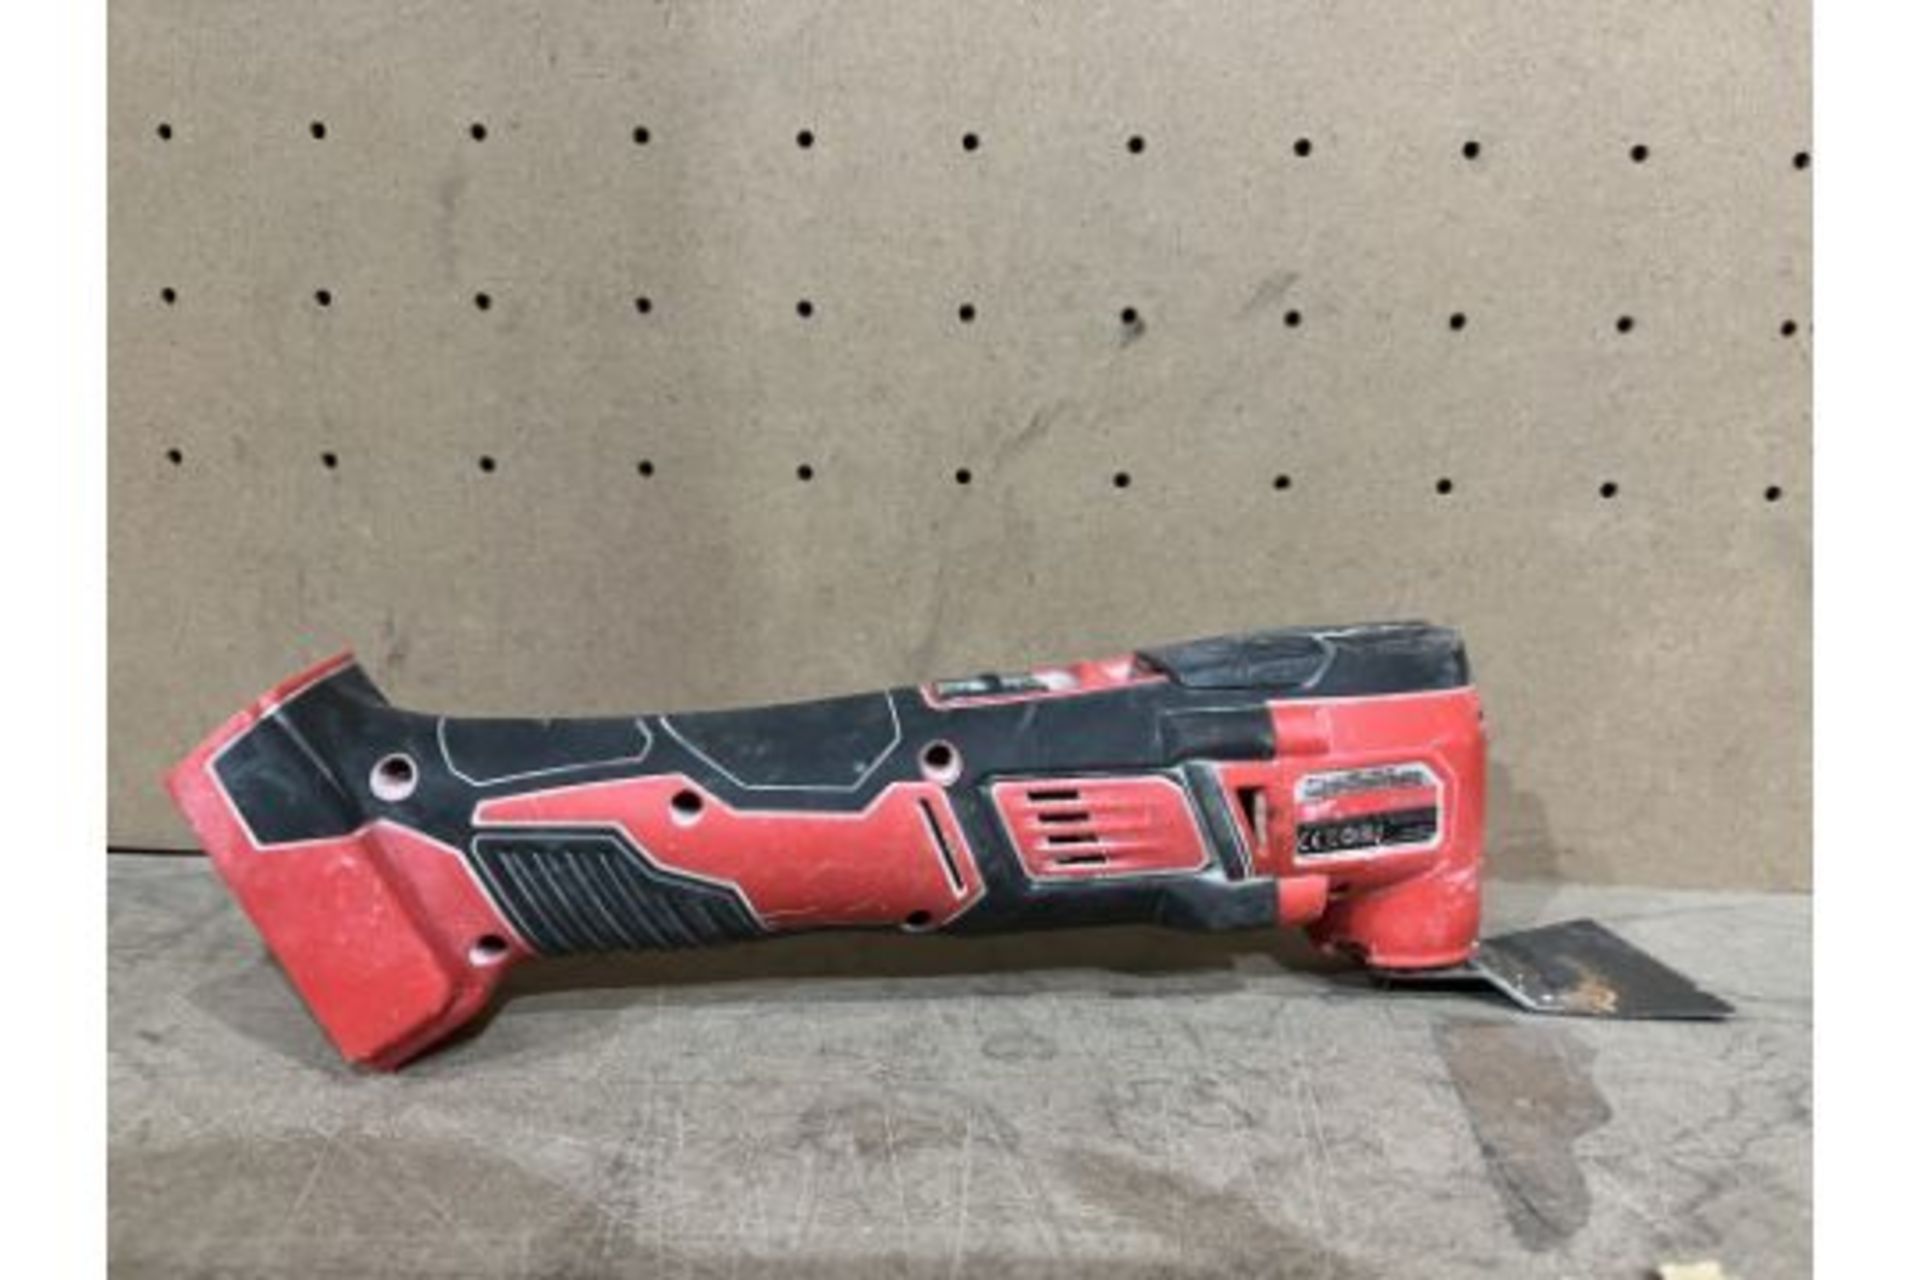 MILWAUKEE CORDLESS MULTI DRILL (UNCHECKED, UNTESTED) PCK